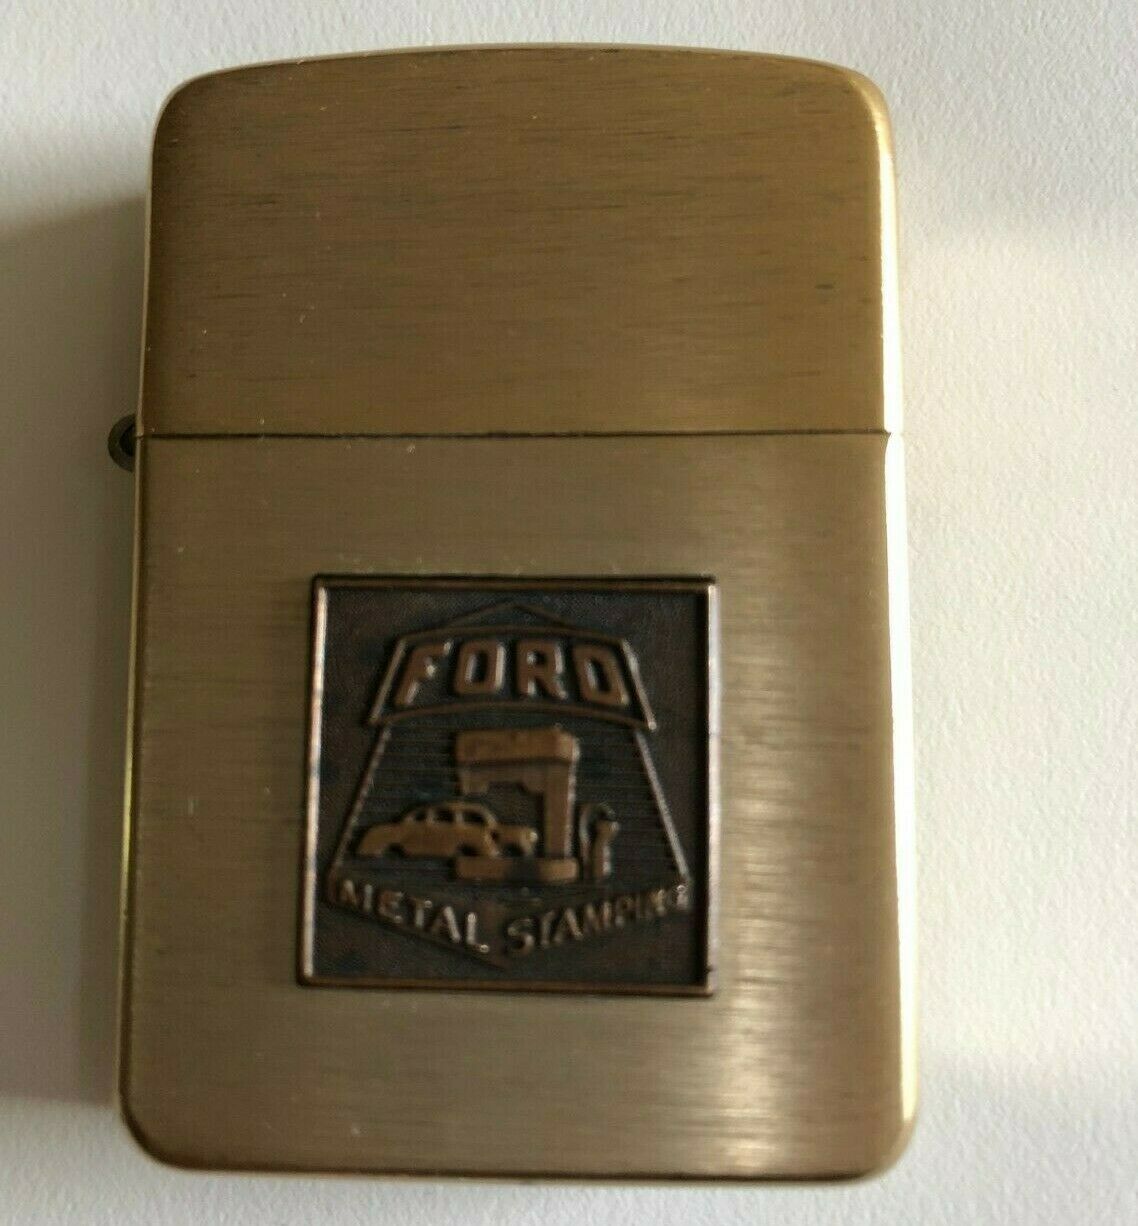 1968 Ford Lighter Chicago Stamping Plant Idea Days Never Used, Park Lighter Co.